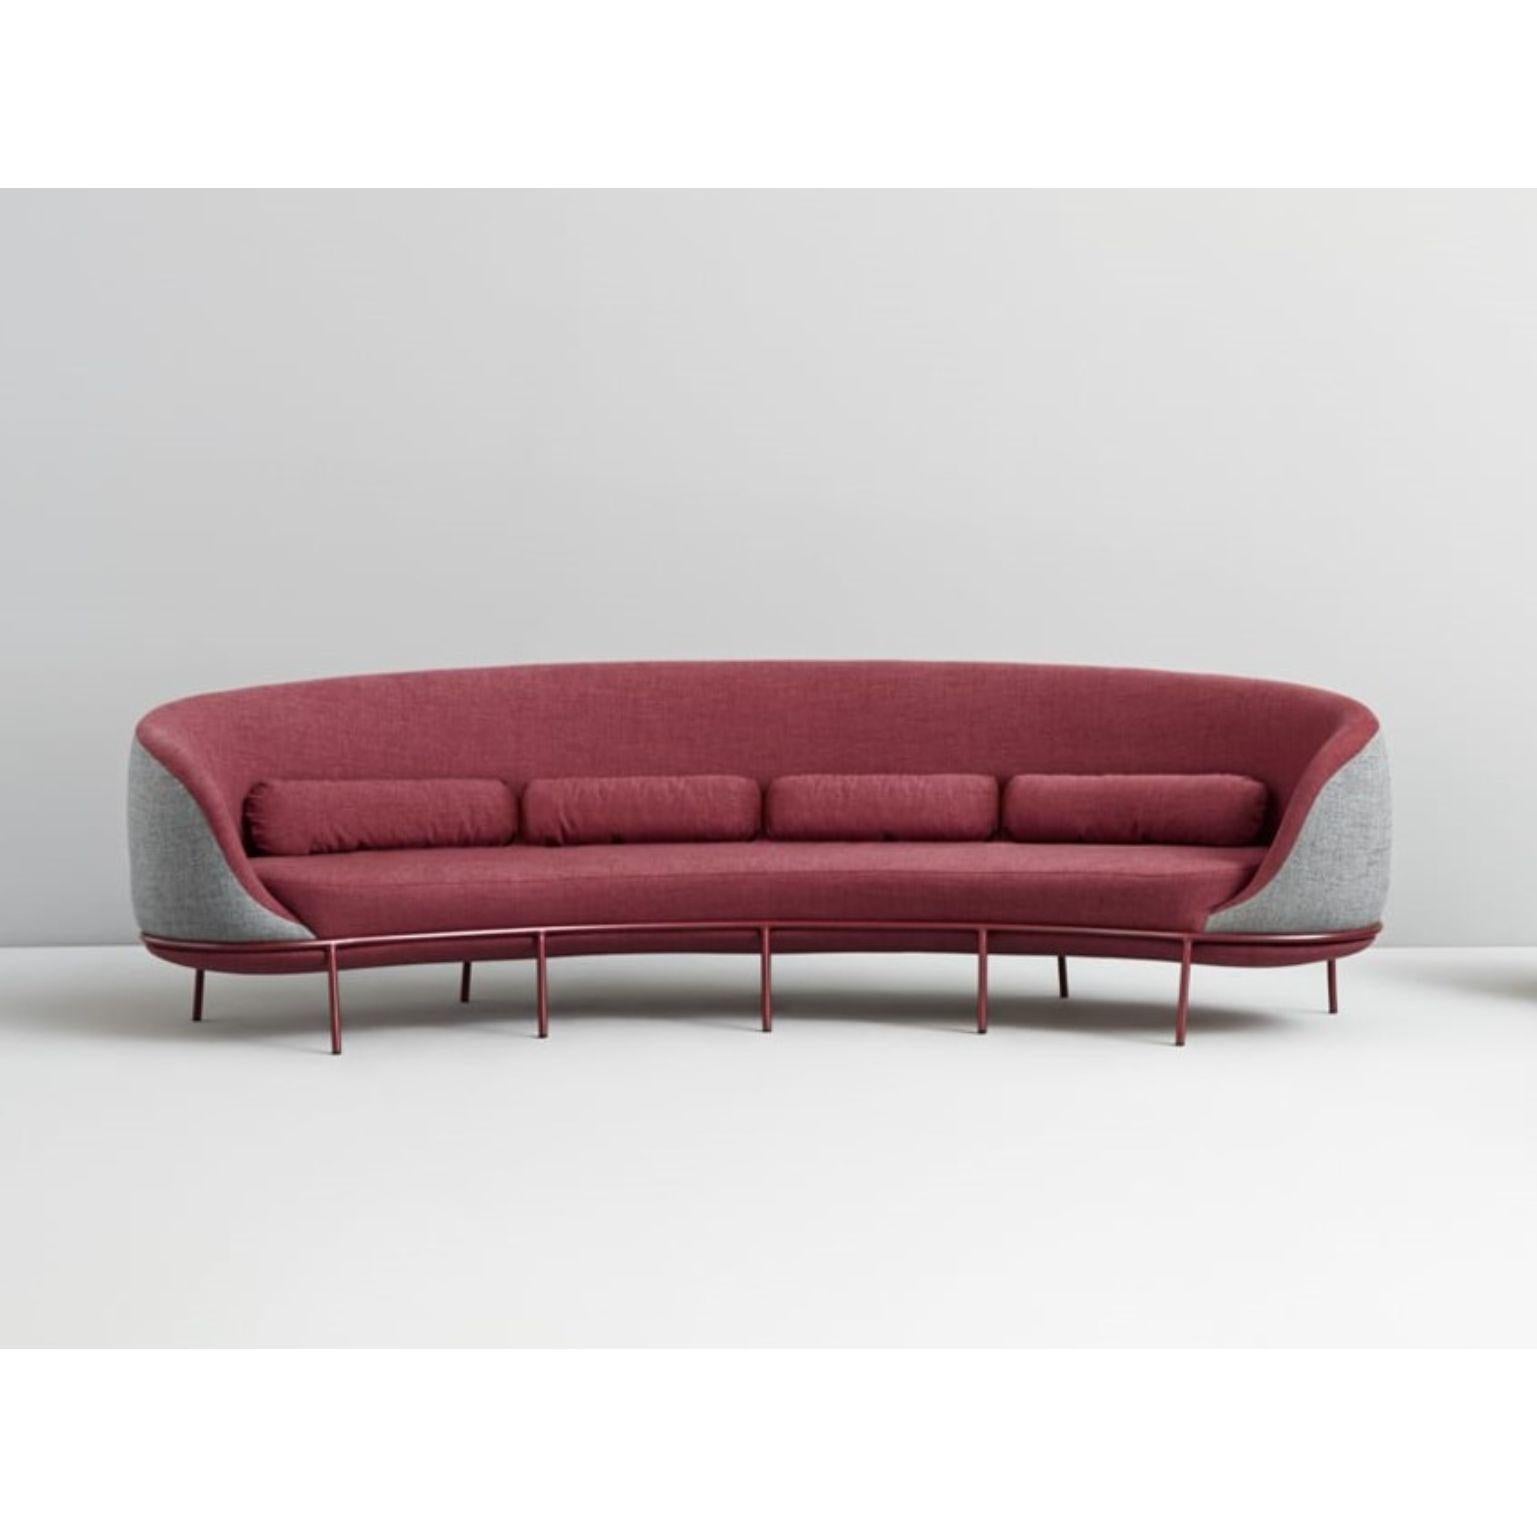 Red nest sofa by Pepe Albargues
Dimensions: W340, D110, H80, seat41
Materials: Iron structure and MDF board
Foam CMHR (high resilience and flame retardant) for all our cushion filling systems
Painted or chromed legs
Stainless steel